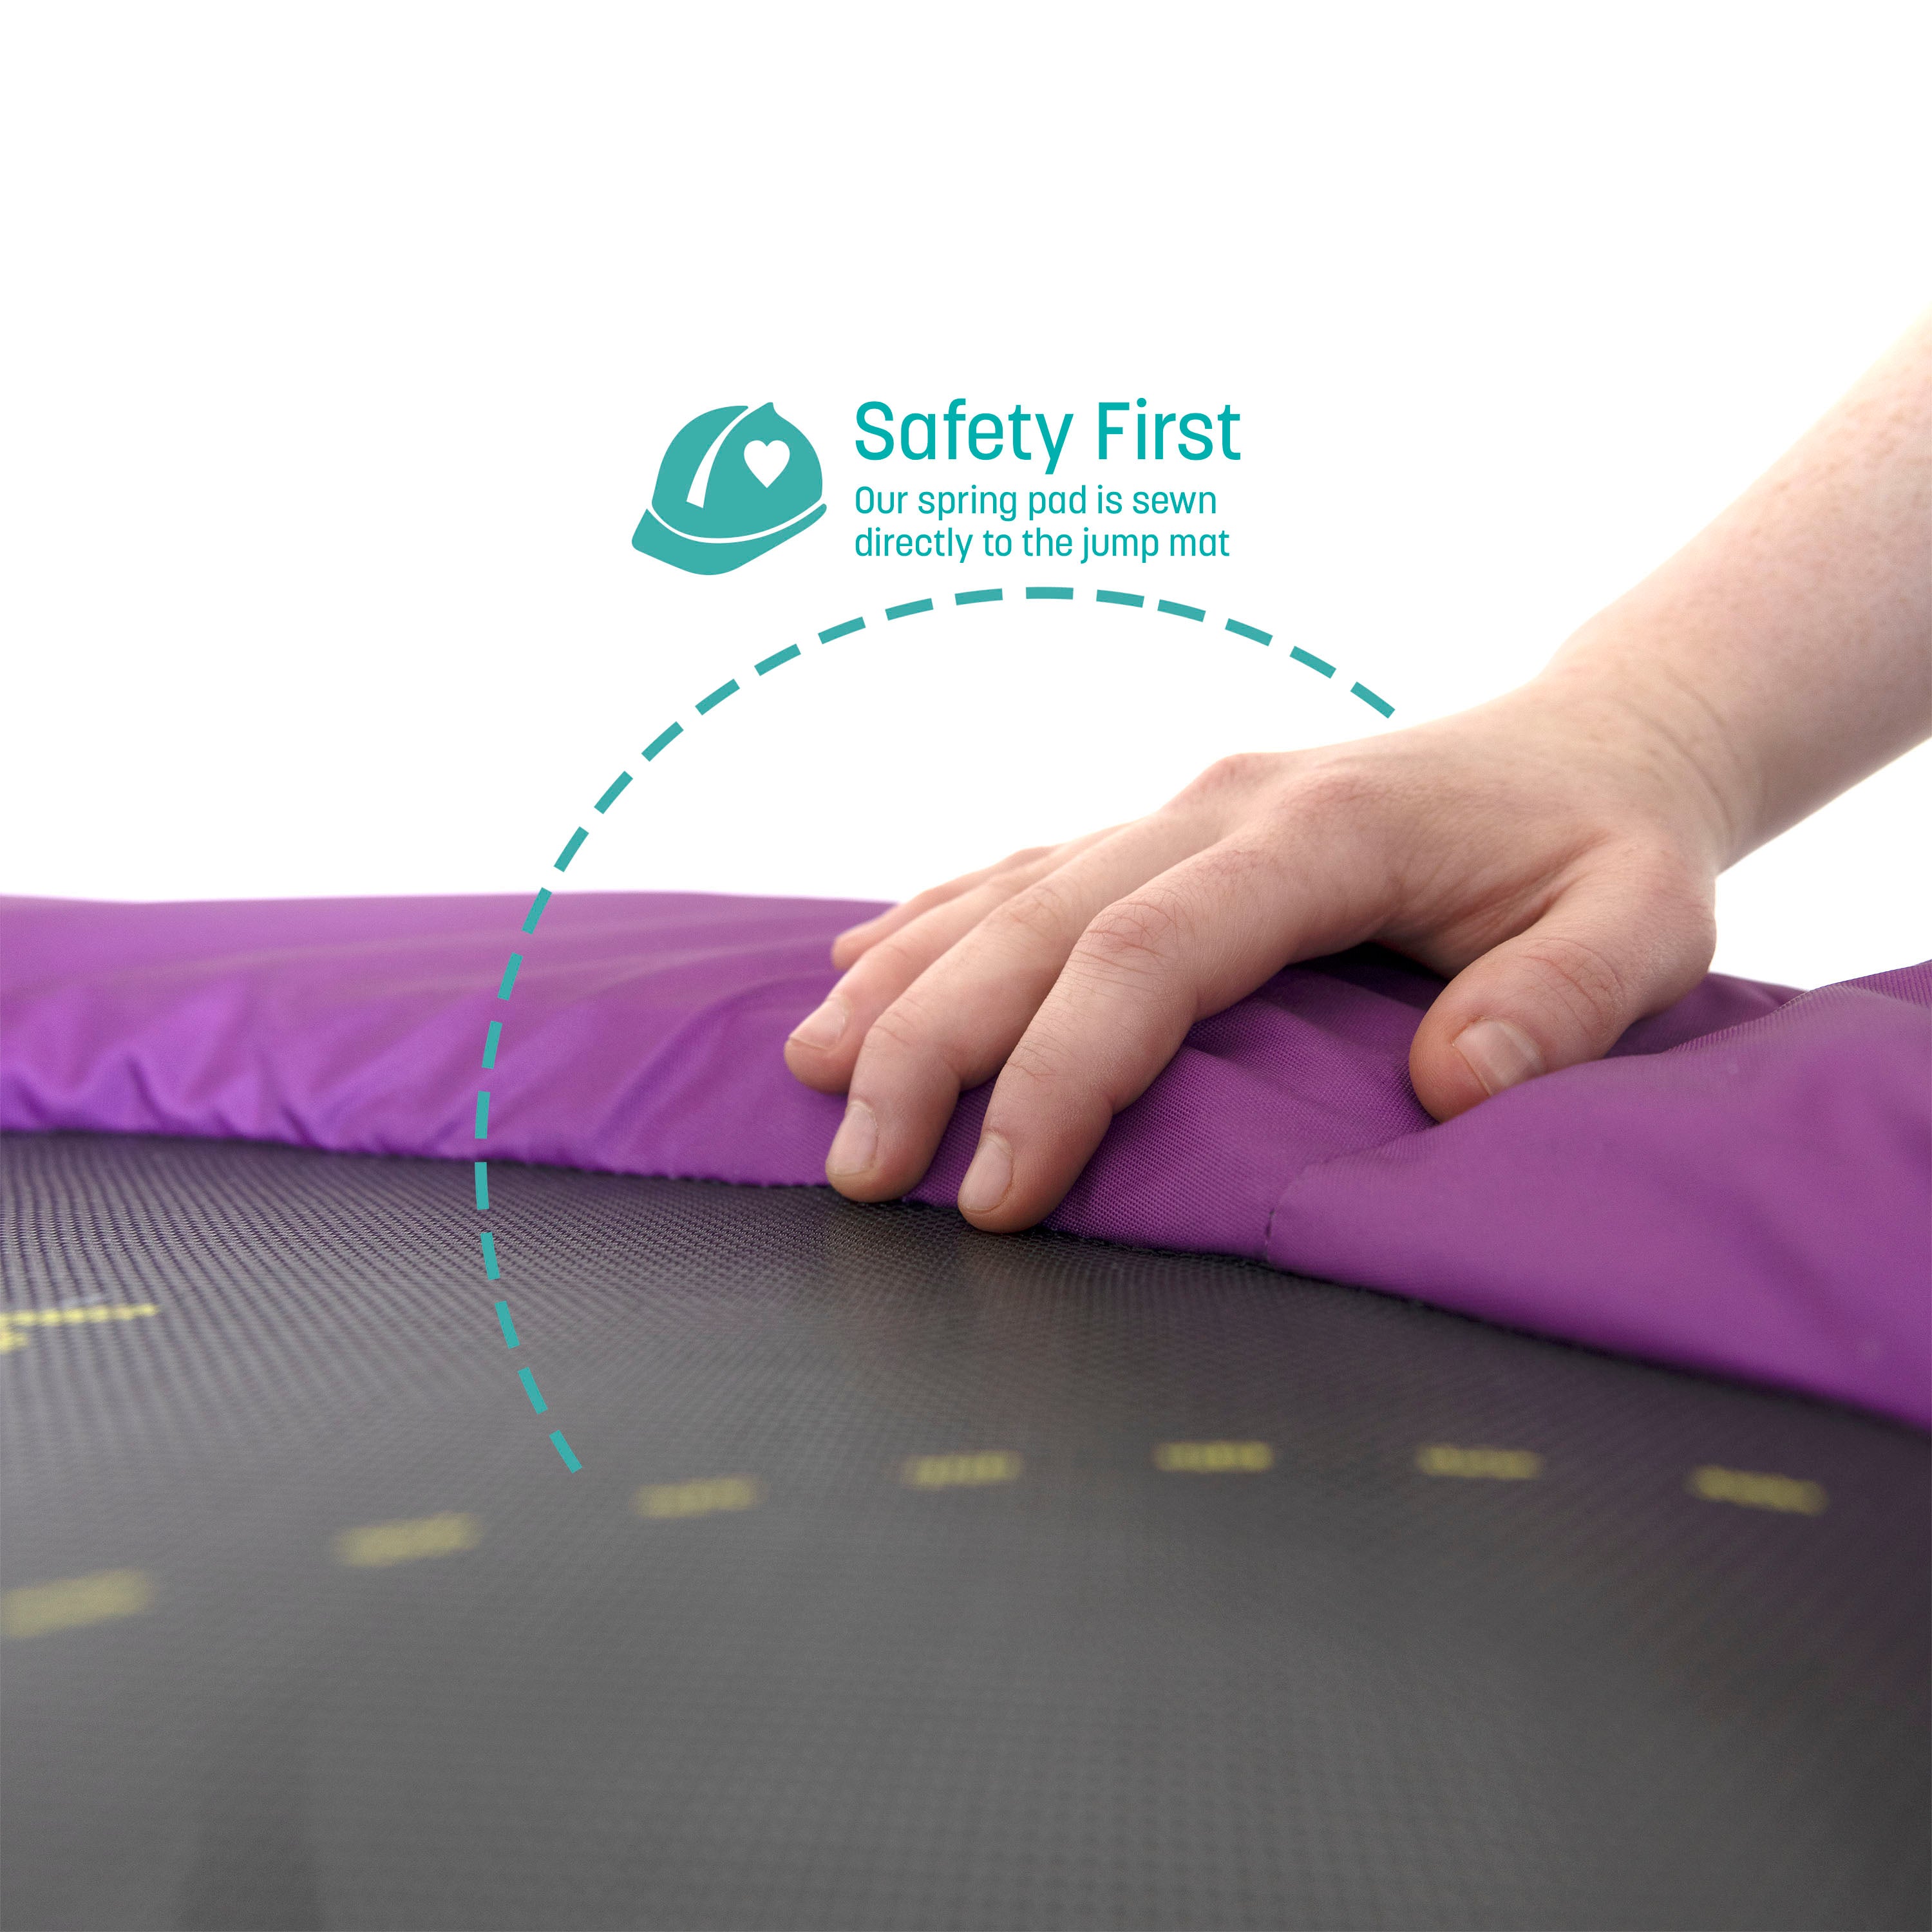 A hand pulls back the purple spring pad. A teal callout feature states, “Safety First: Our spring pad is sewn directly to the jump mat.”